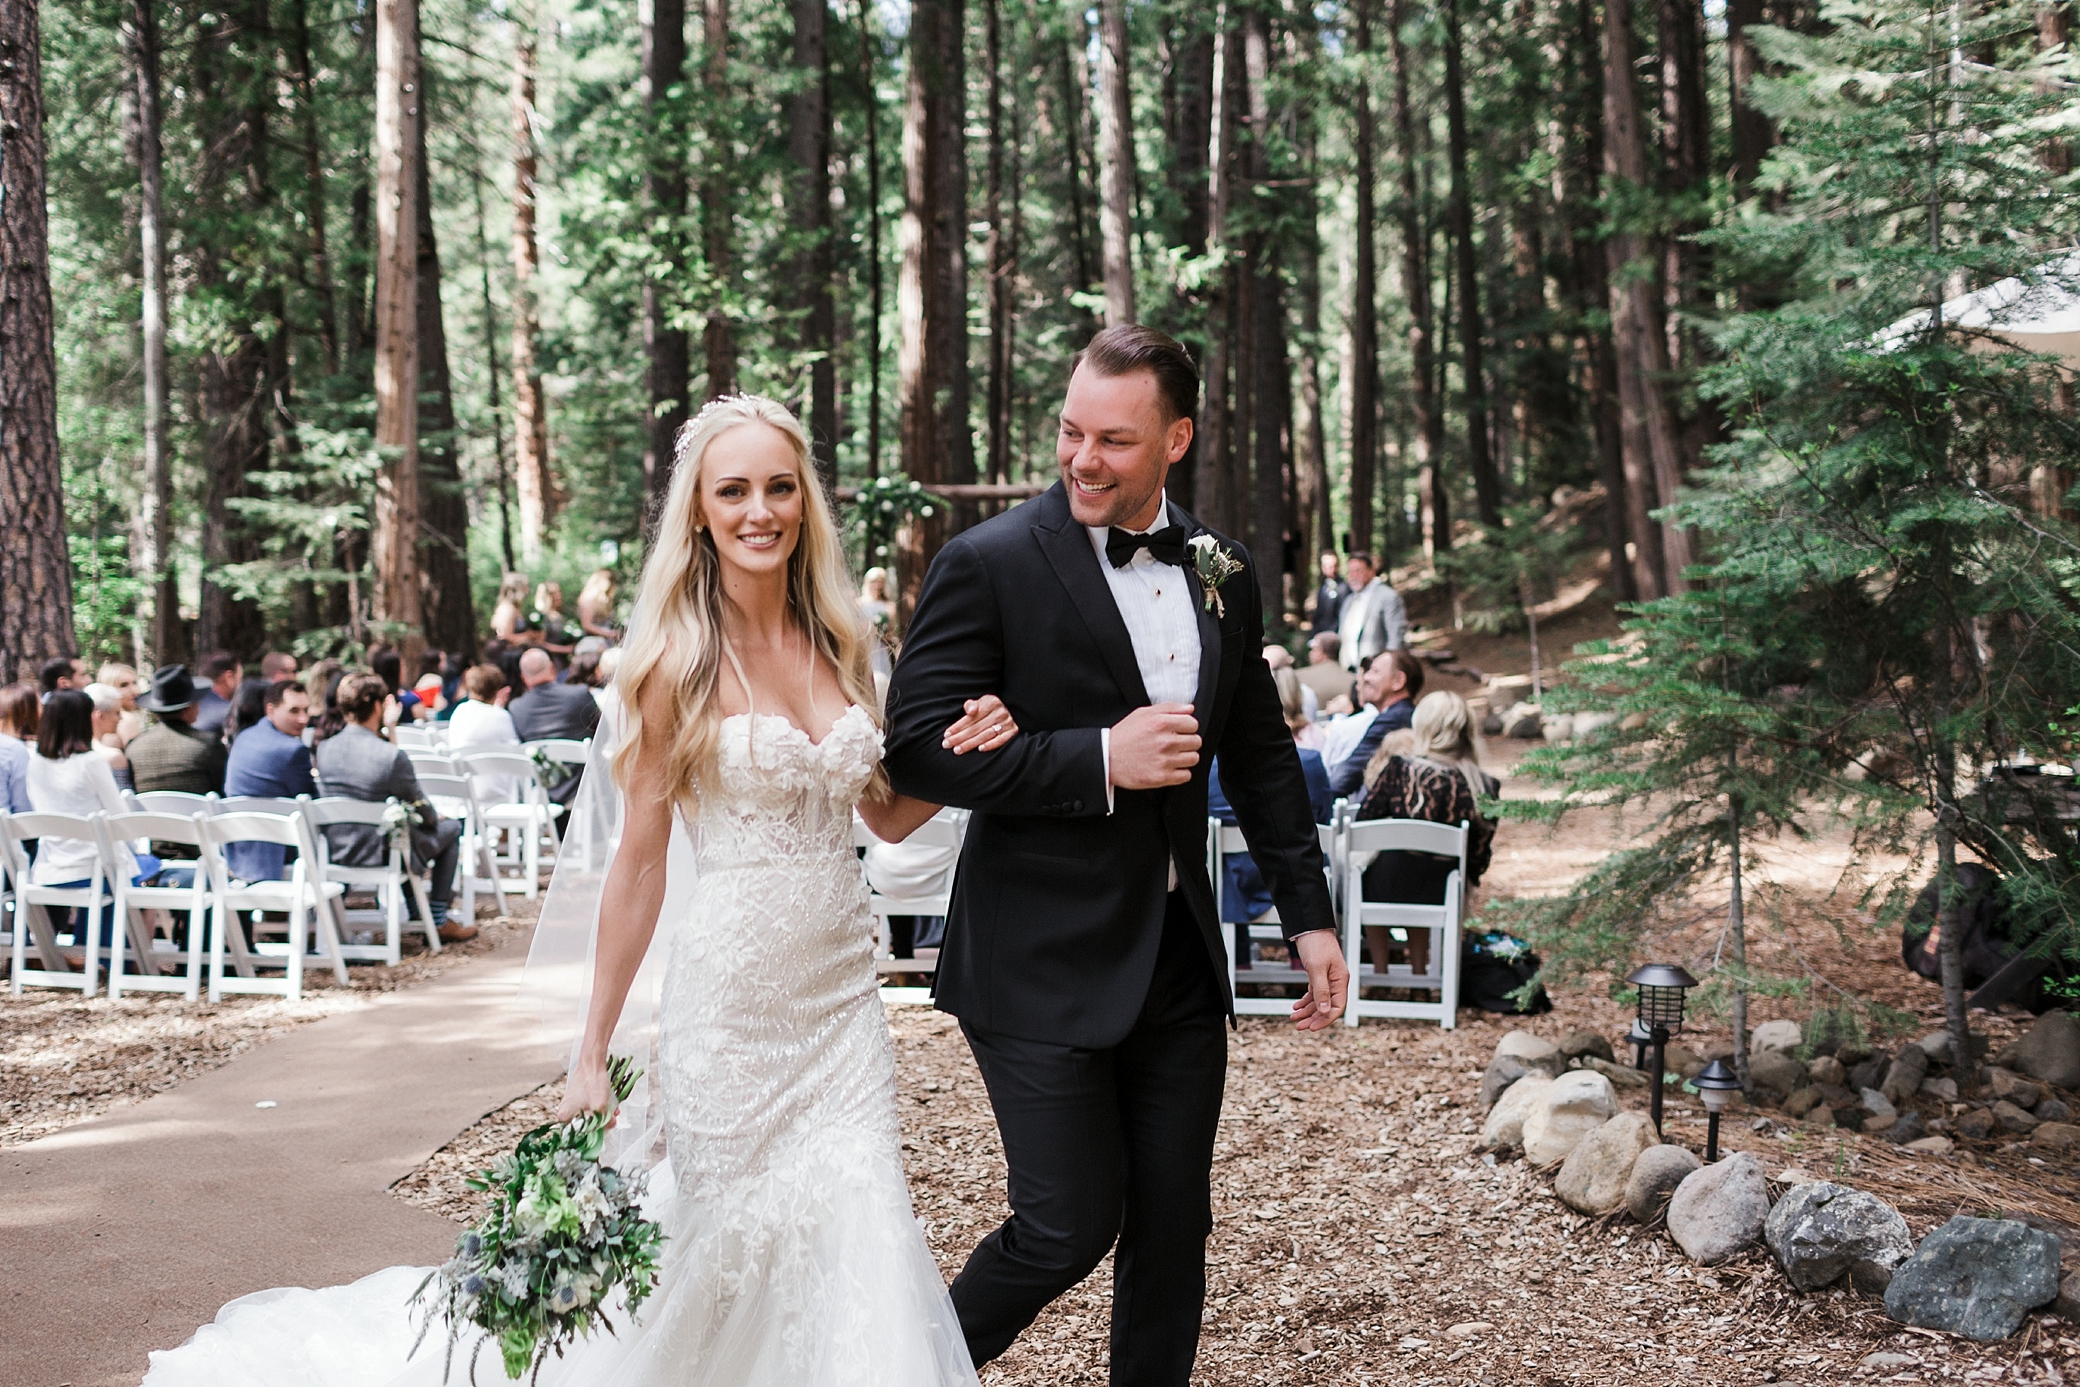 Bride and groom are married at Northern California Wedding Venue | Megan Montalvo Photography 